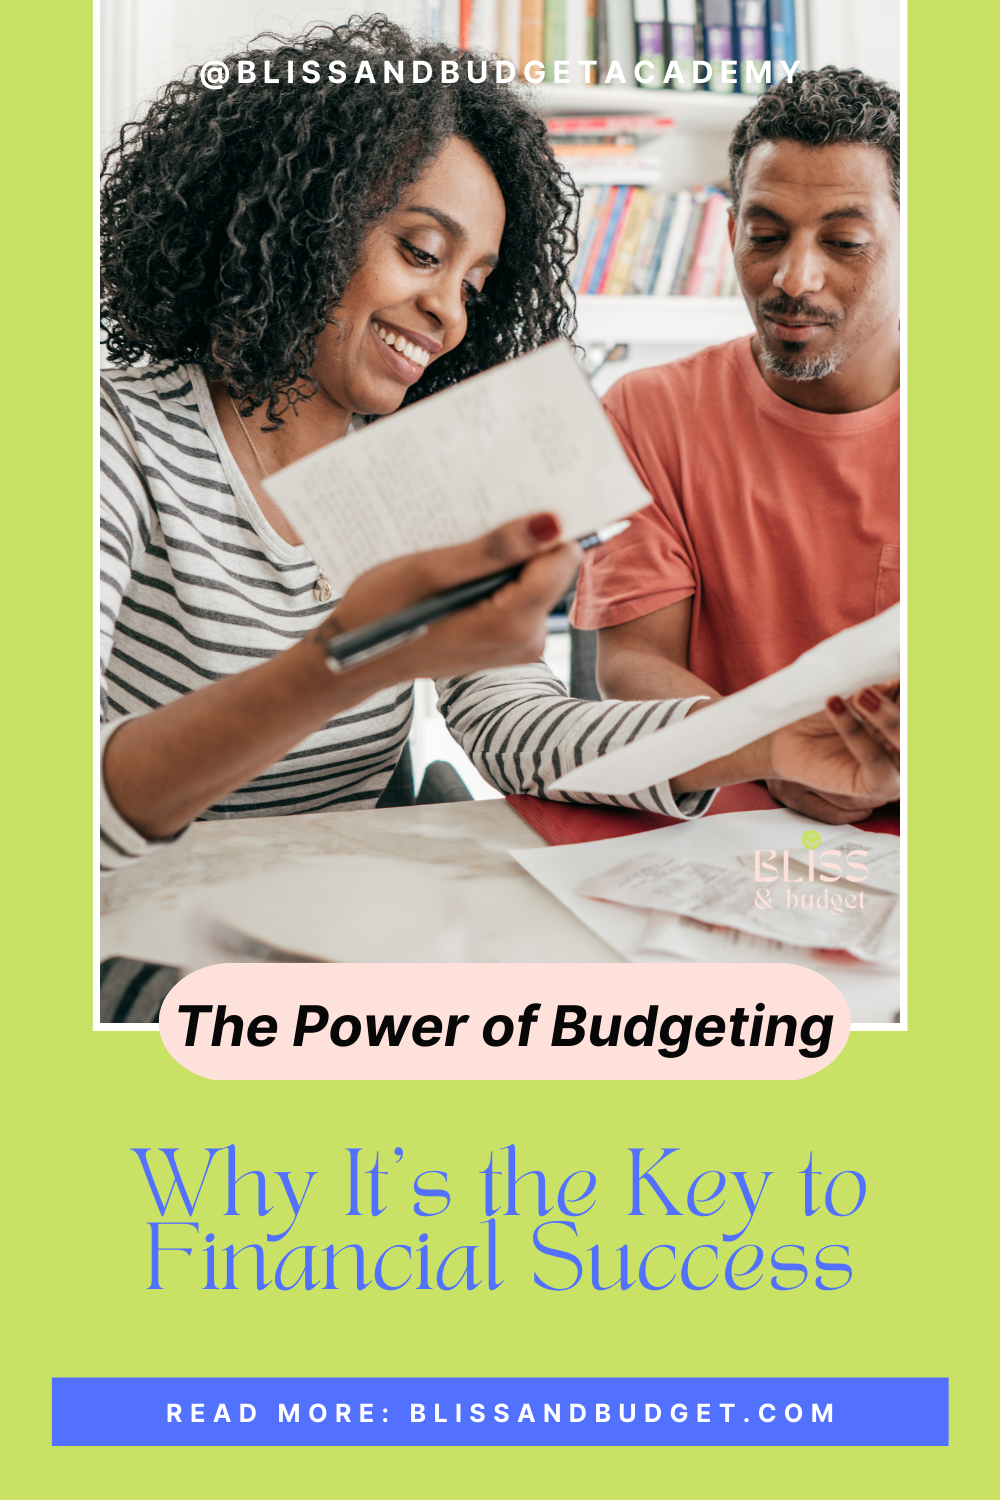 The Power of Budgeting: Why It's the Key to Financial Success